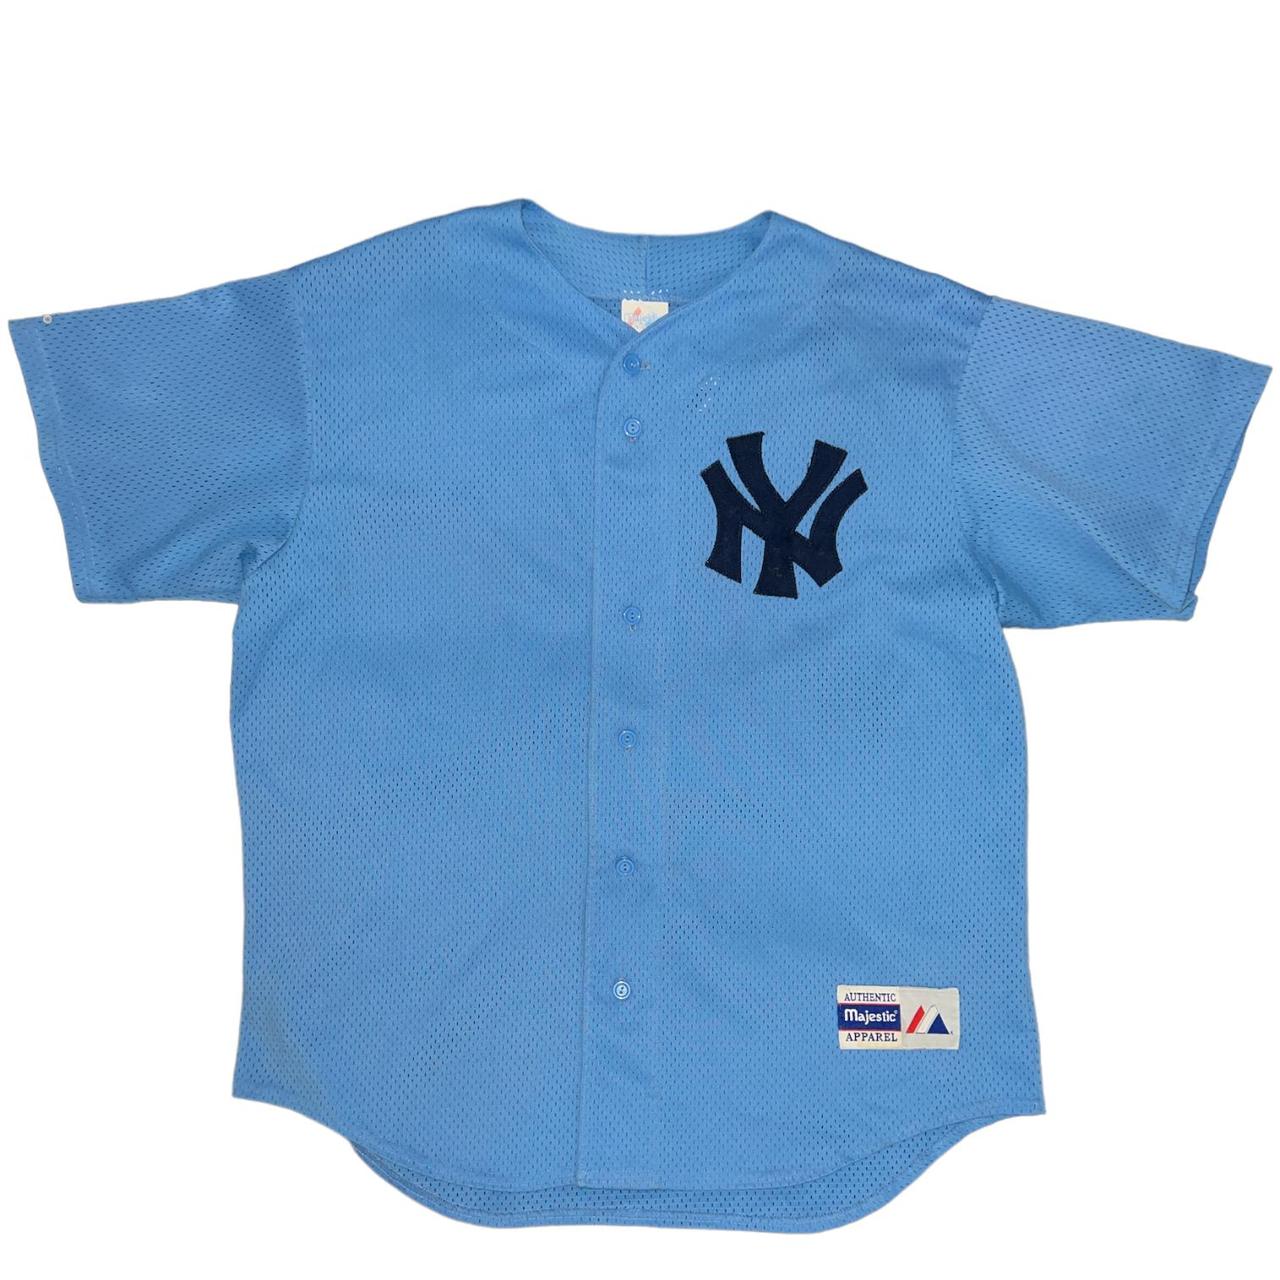 Official Majestic MLB New York Yankees Baseball Jersey Size 